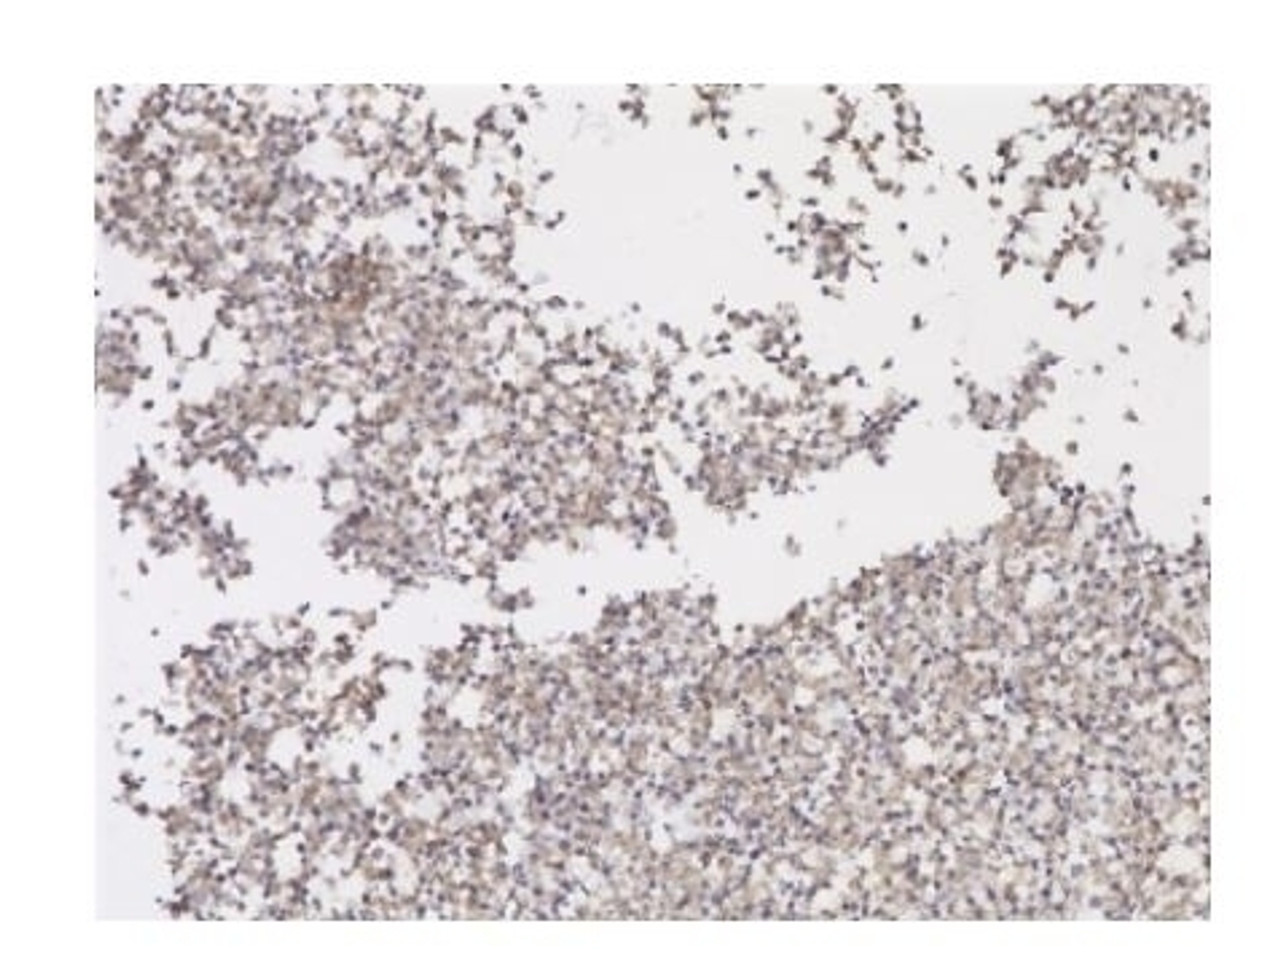 SARS-CoV-2 Spike RBD Antibody (clone 2165) IHC Data using infected cell pellets.